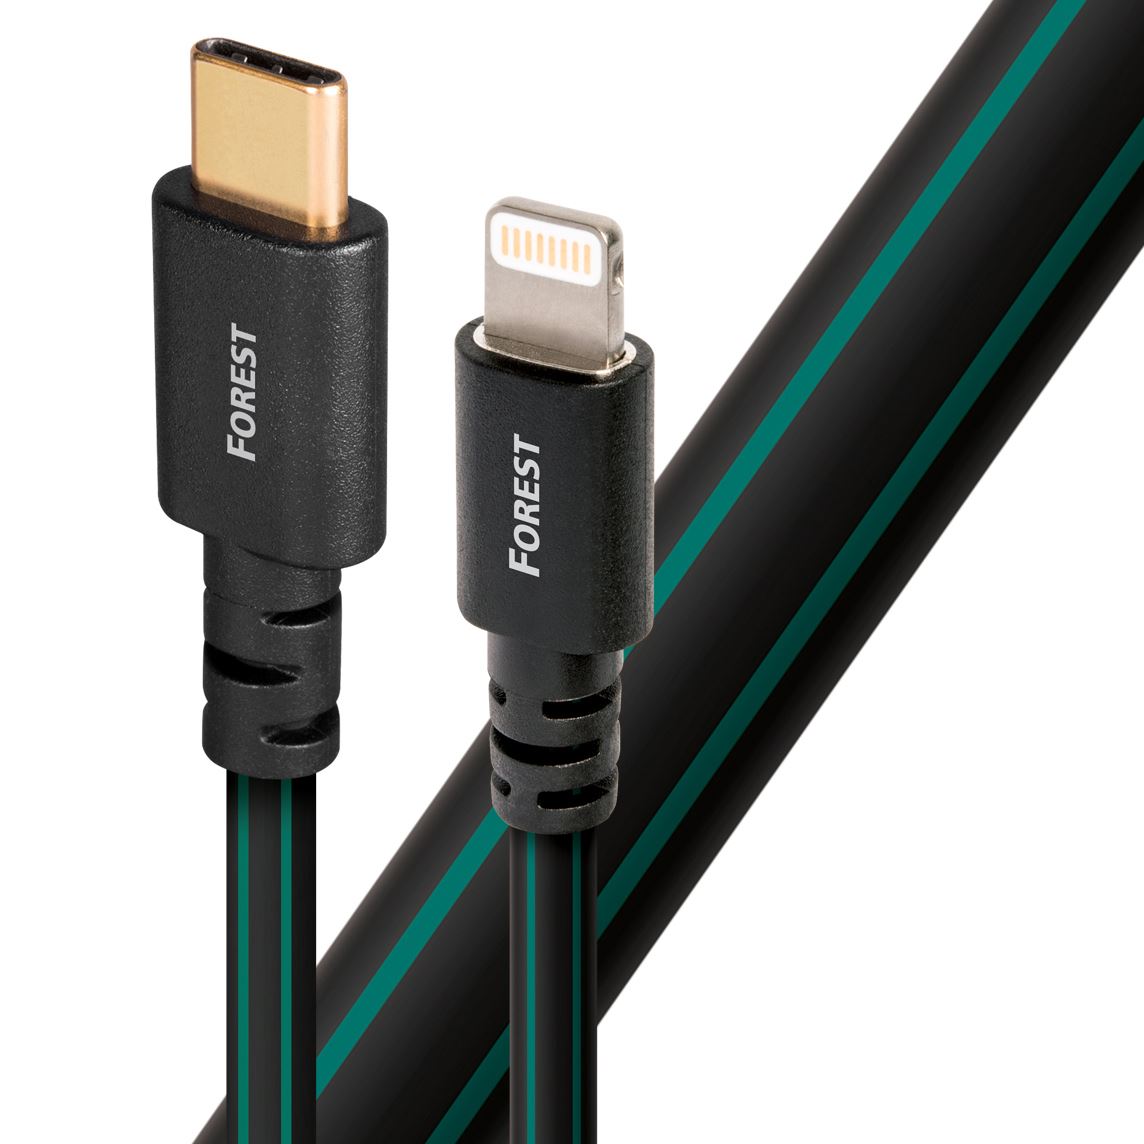 AUDIOQUEST_Forest_.75M_lightning_to_USB2C._O.5%_silver._Hard-cell_foam._Metal-layer_noise_dissipation_Jacket_-_black_PVC_with_green_stripes._0.75M_FOREST_LIGHTNING-USB_C 1483